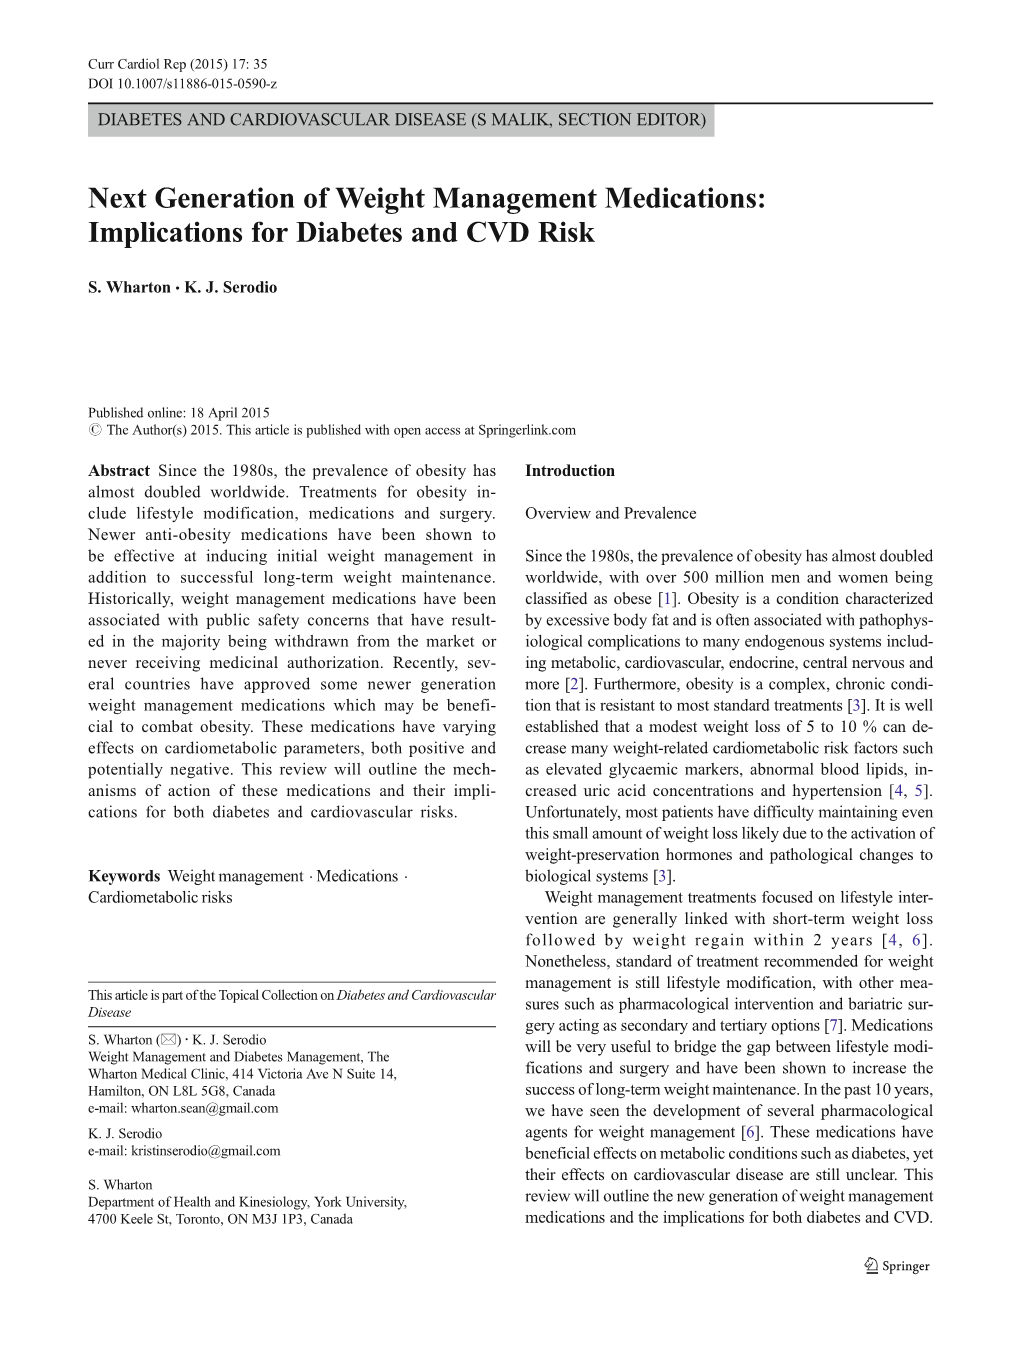 Next Generation of Weight Management Medications: Implications for Diabetes and CVD Risk